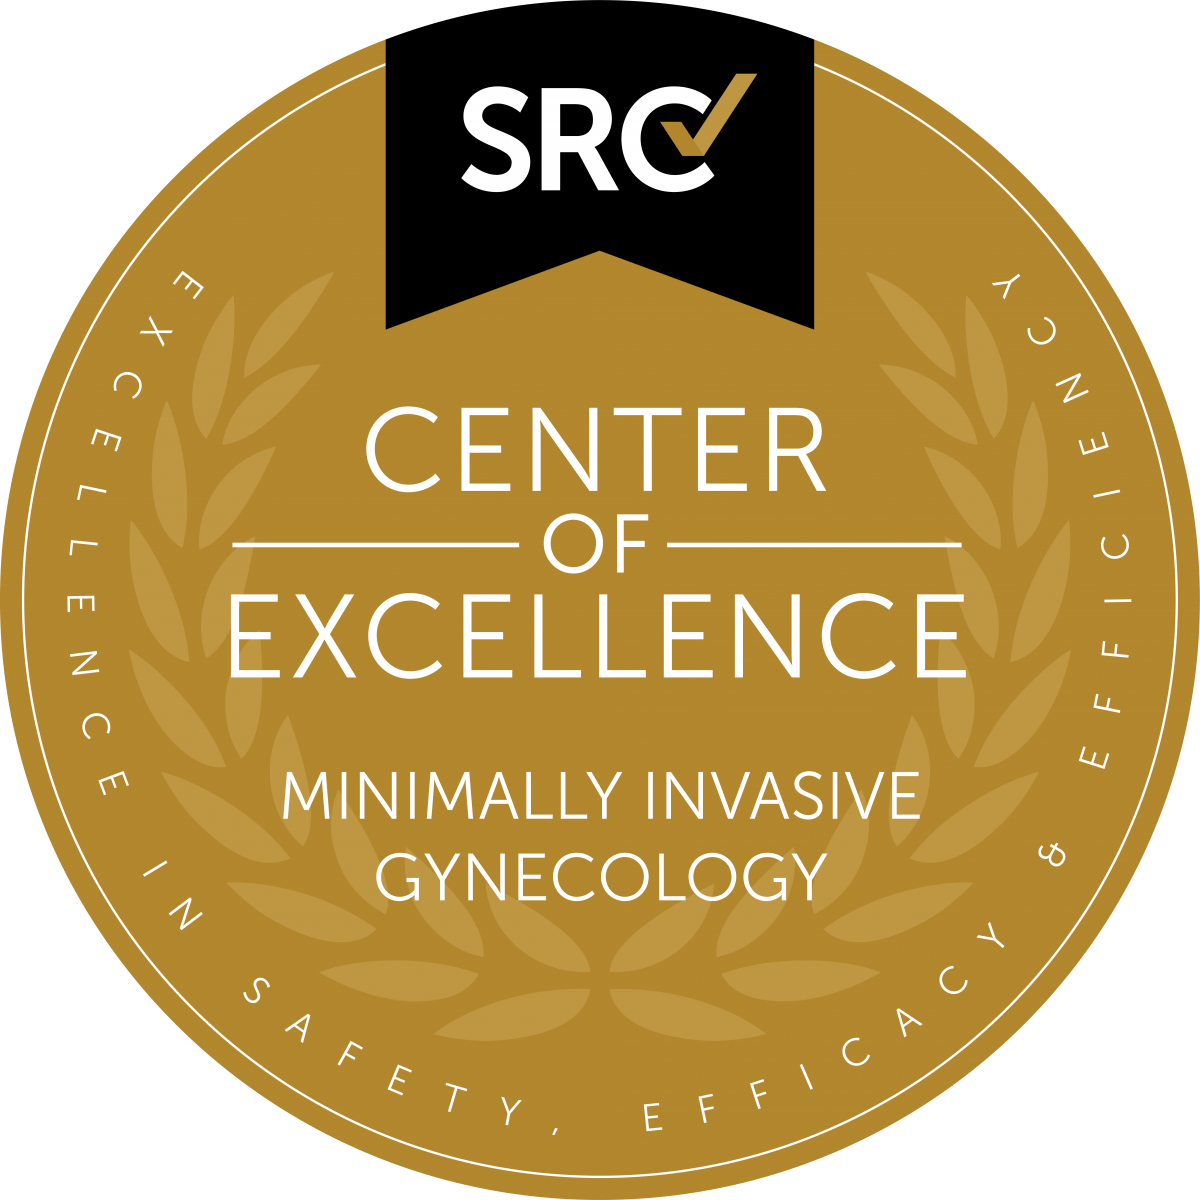 SRC Center of Excellence Minimally Invasive Gynecology